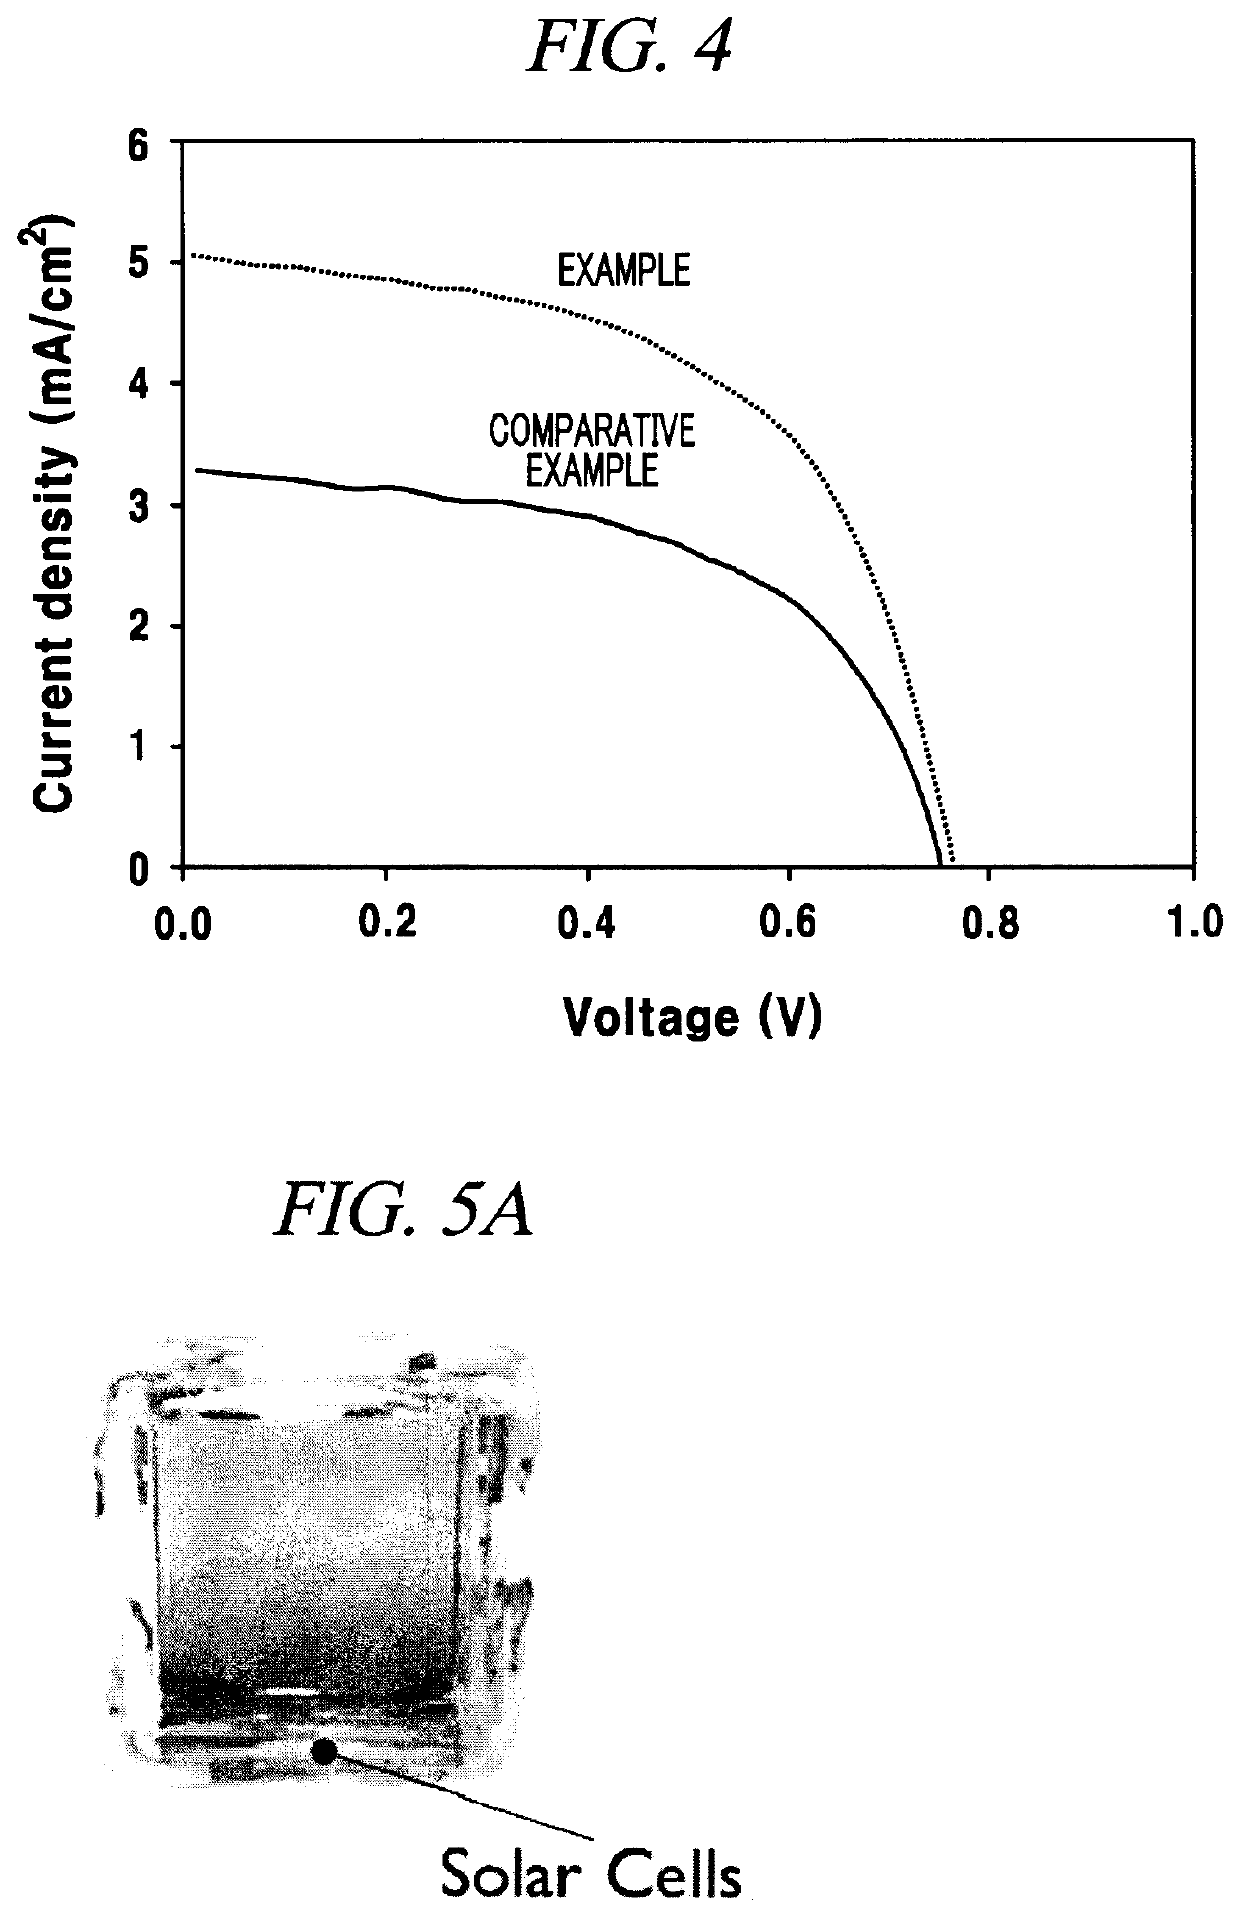 Dye-sensitized solar cell comprising light collecting device panel